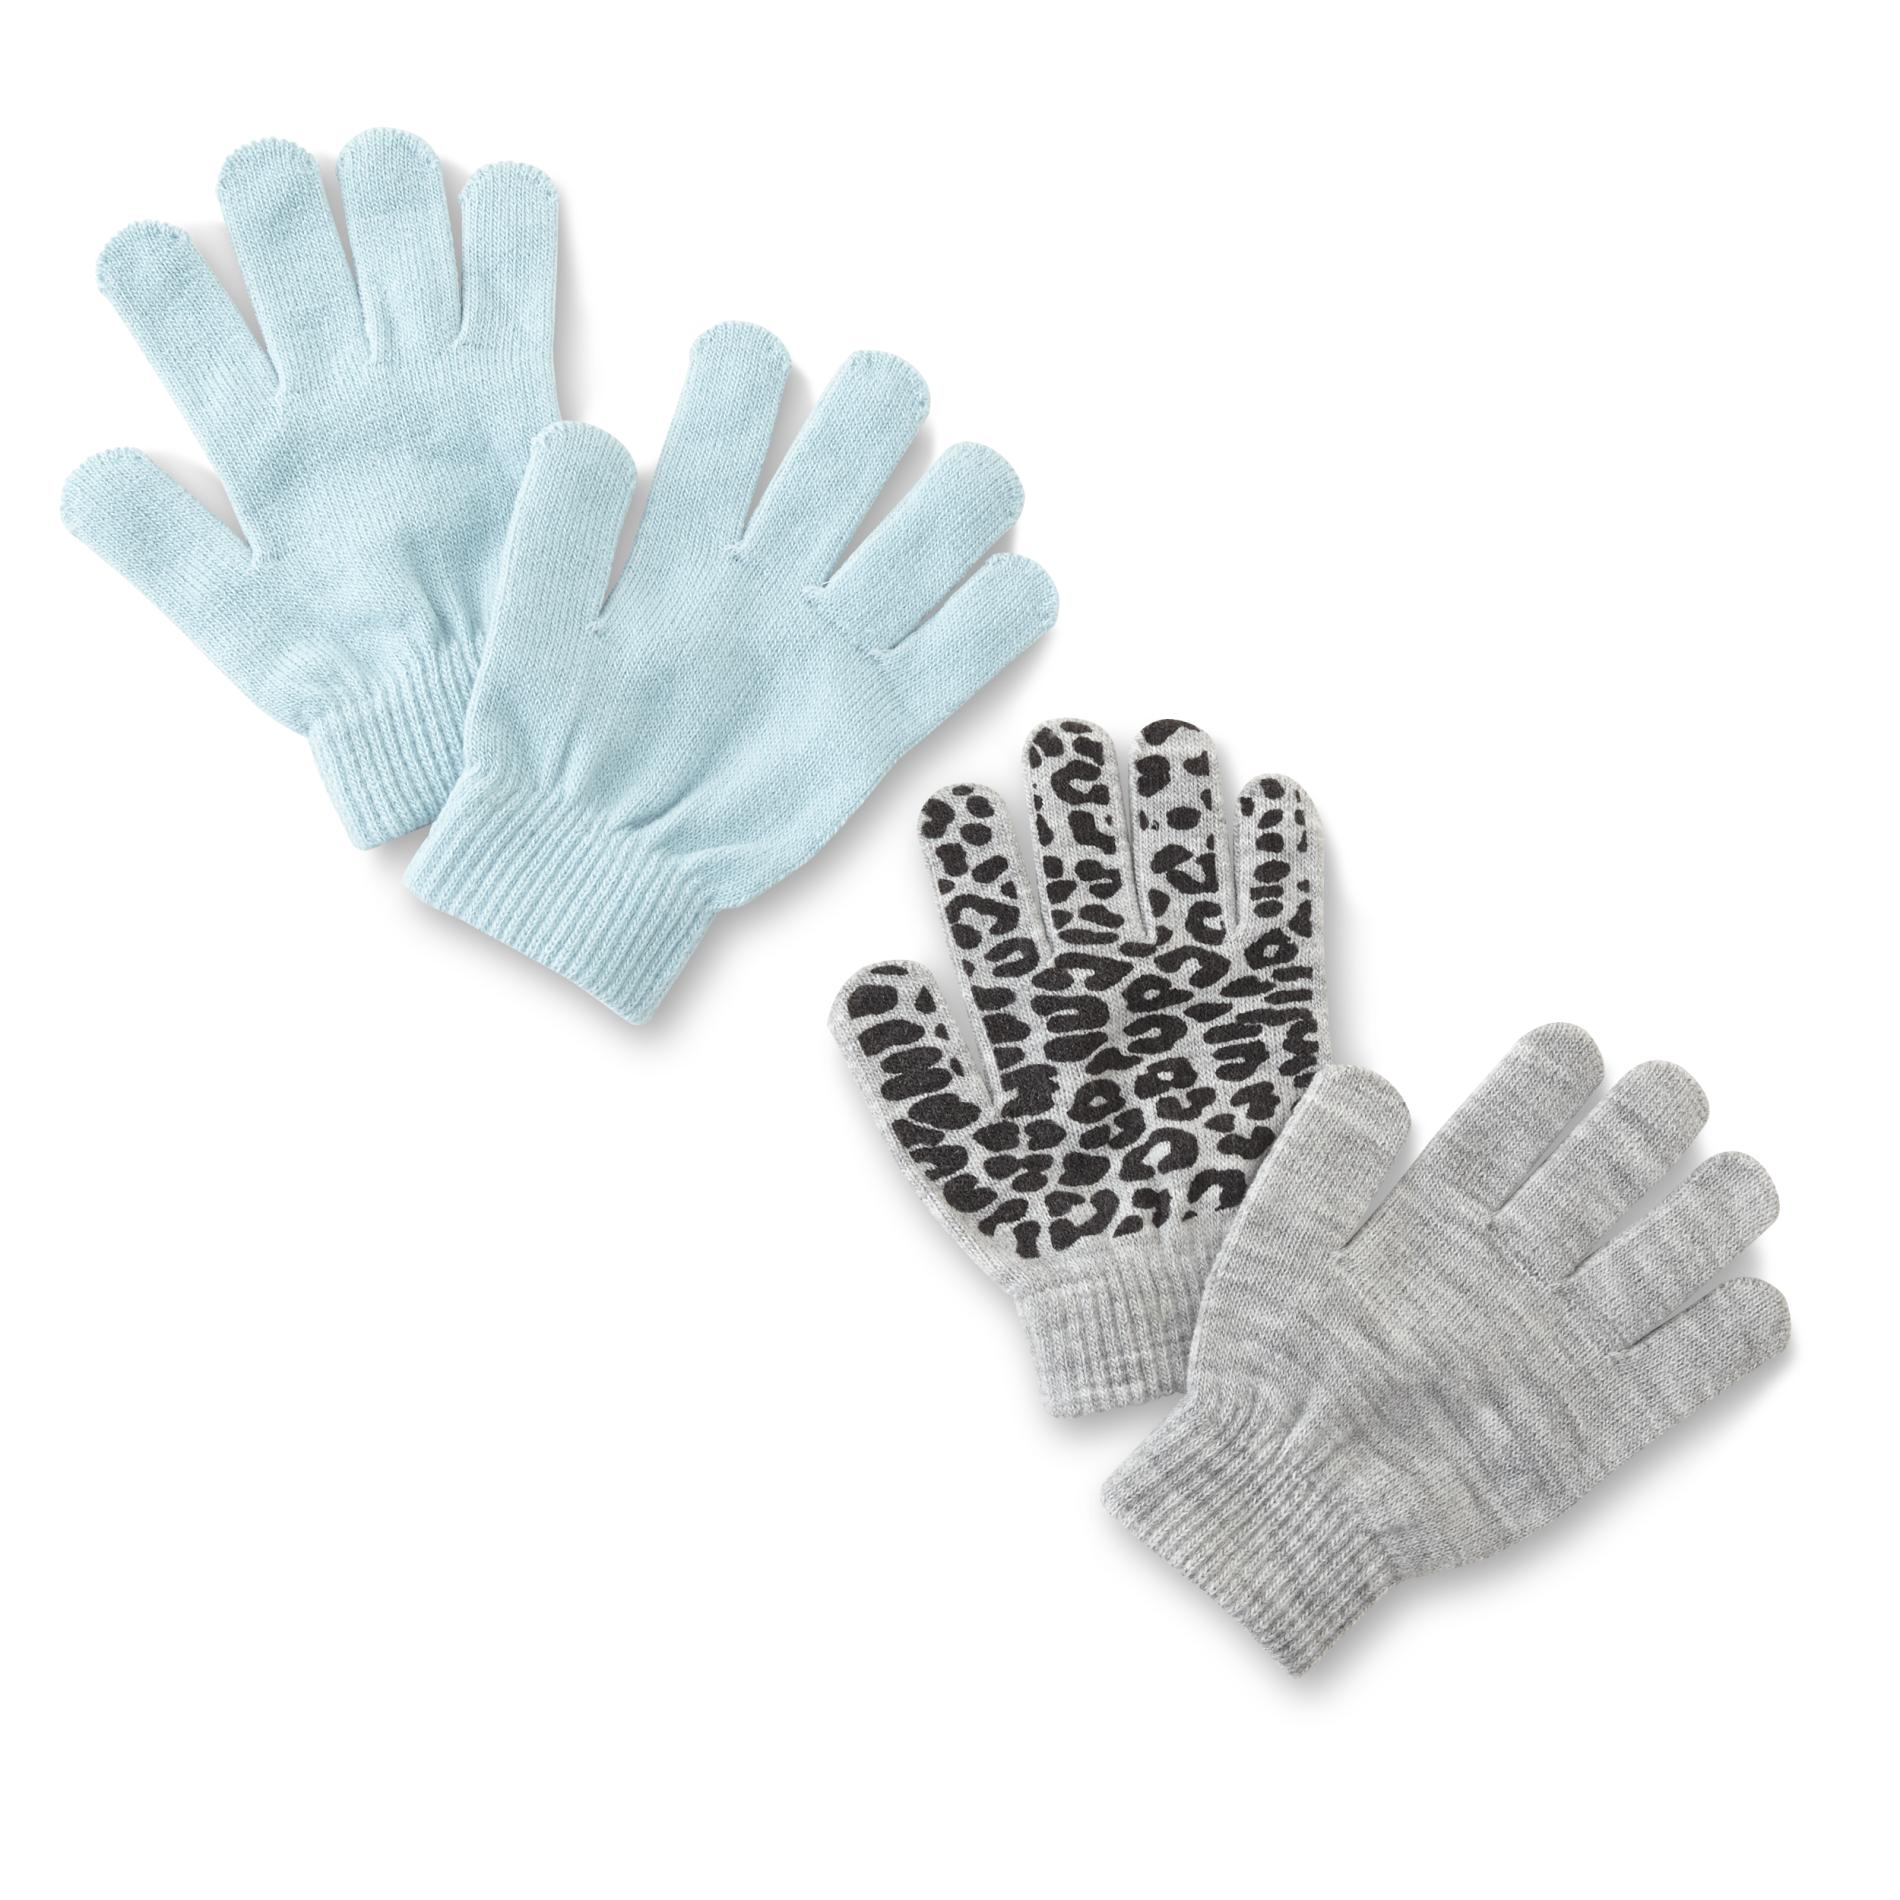 Simply Styled Girls' 2-Pairs Gloves - Solid & Leopard Print